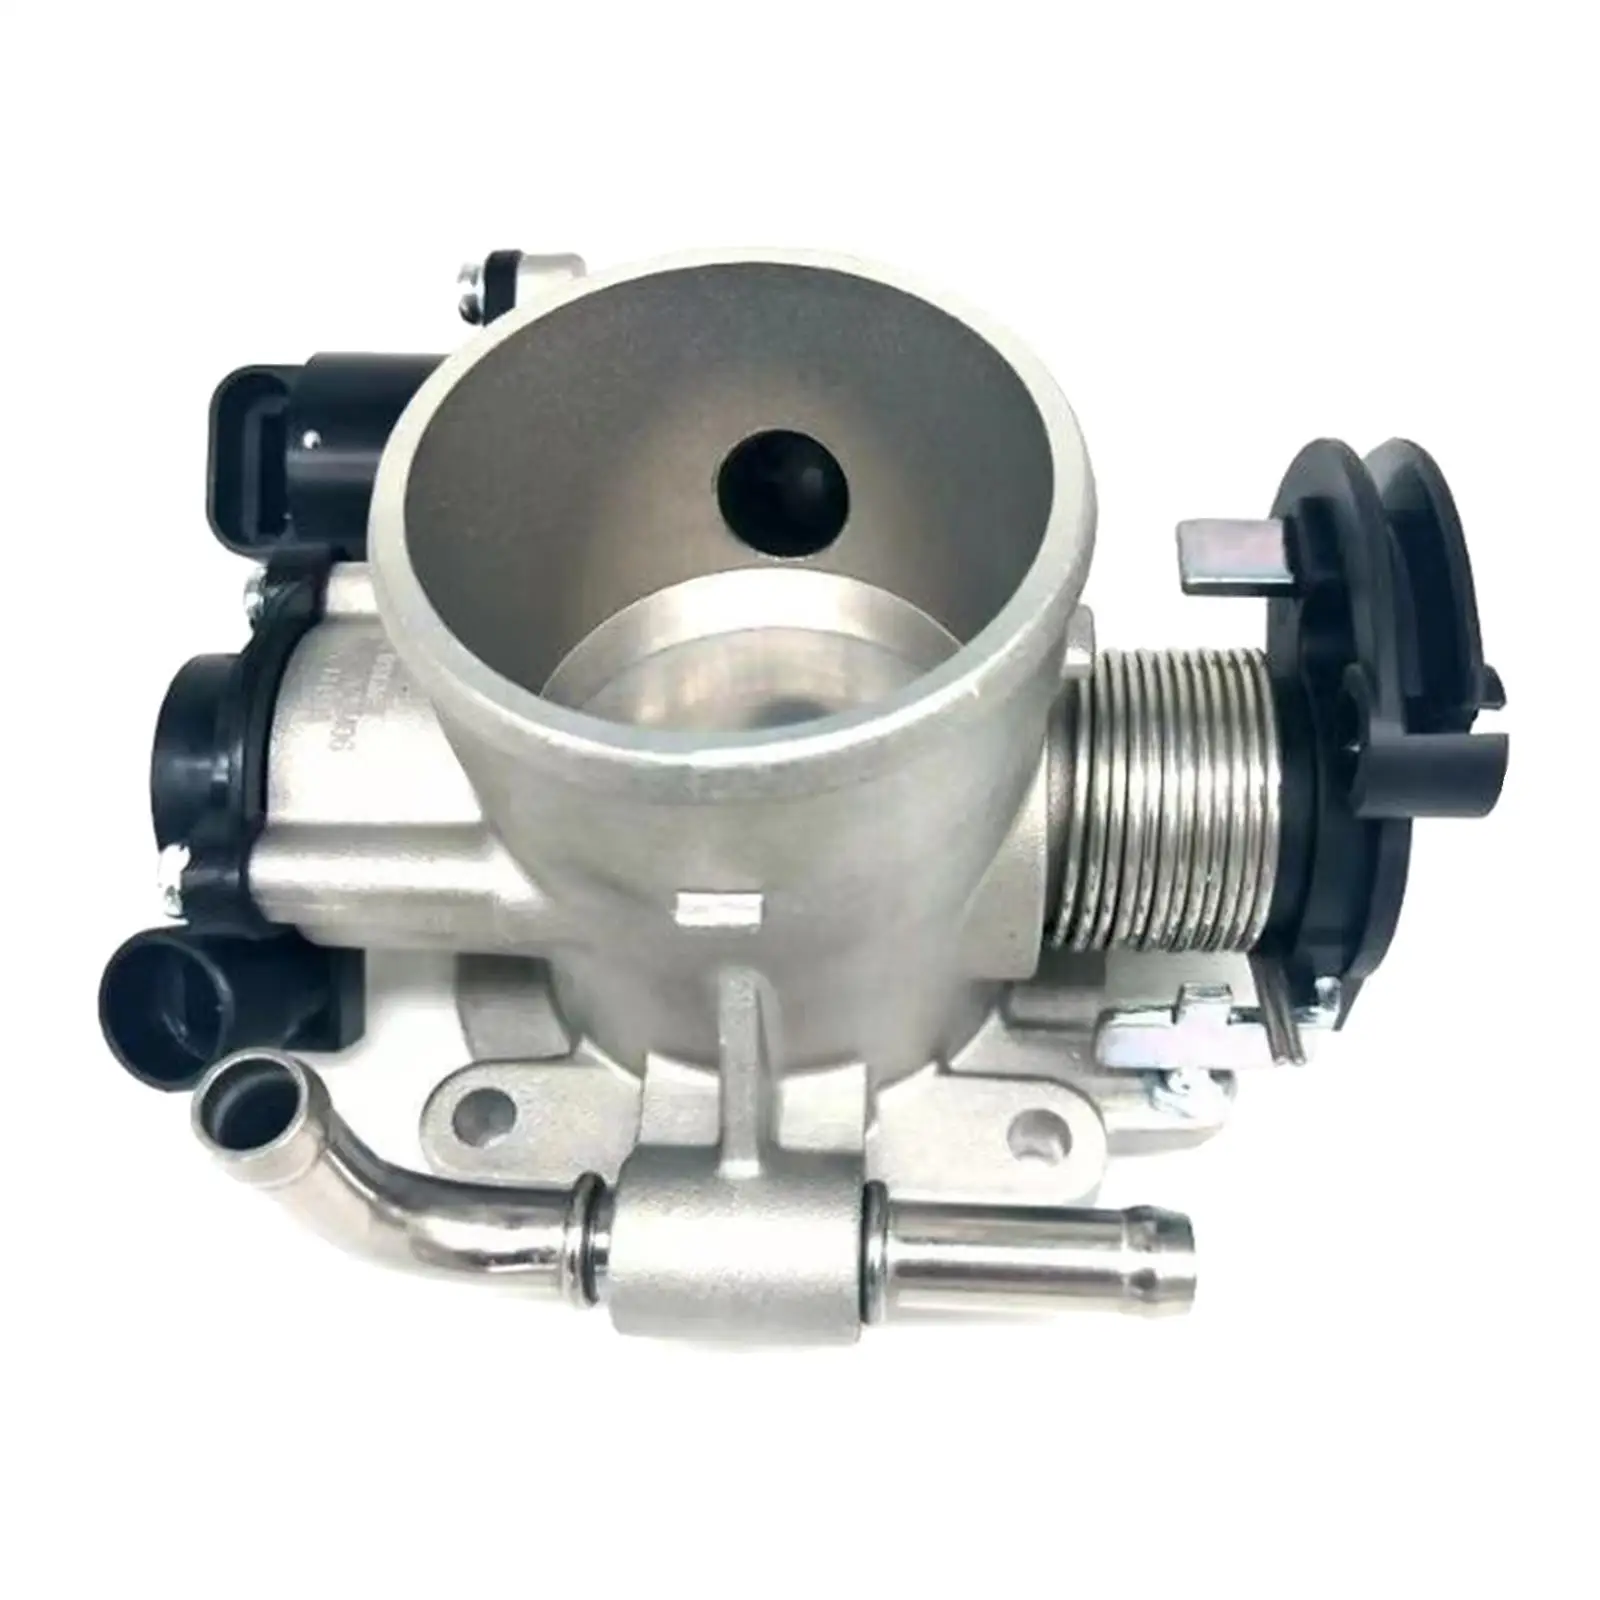 Electronic Throttle Body Assembly 96815470 96378856 for Chevrolet Zentra Automobile Repairing Accessory Easily Install